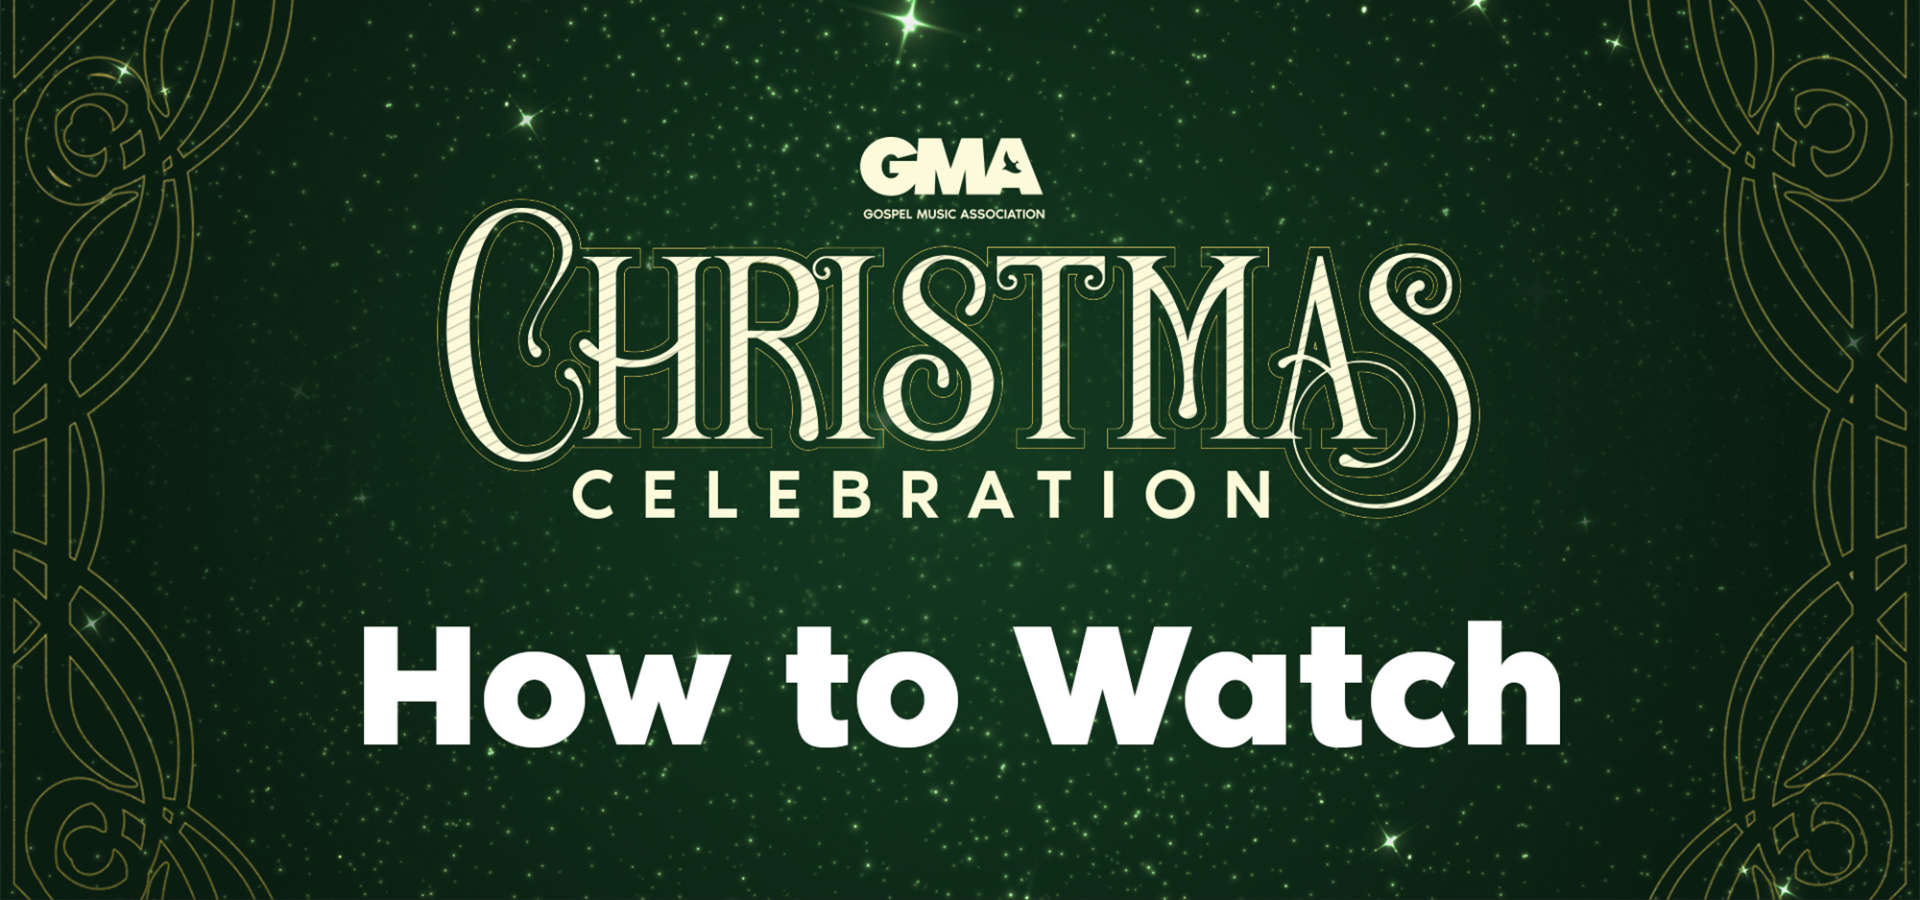 HOW TO WATCH: GMA Christmas Celebration Airing December 19th